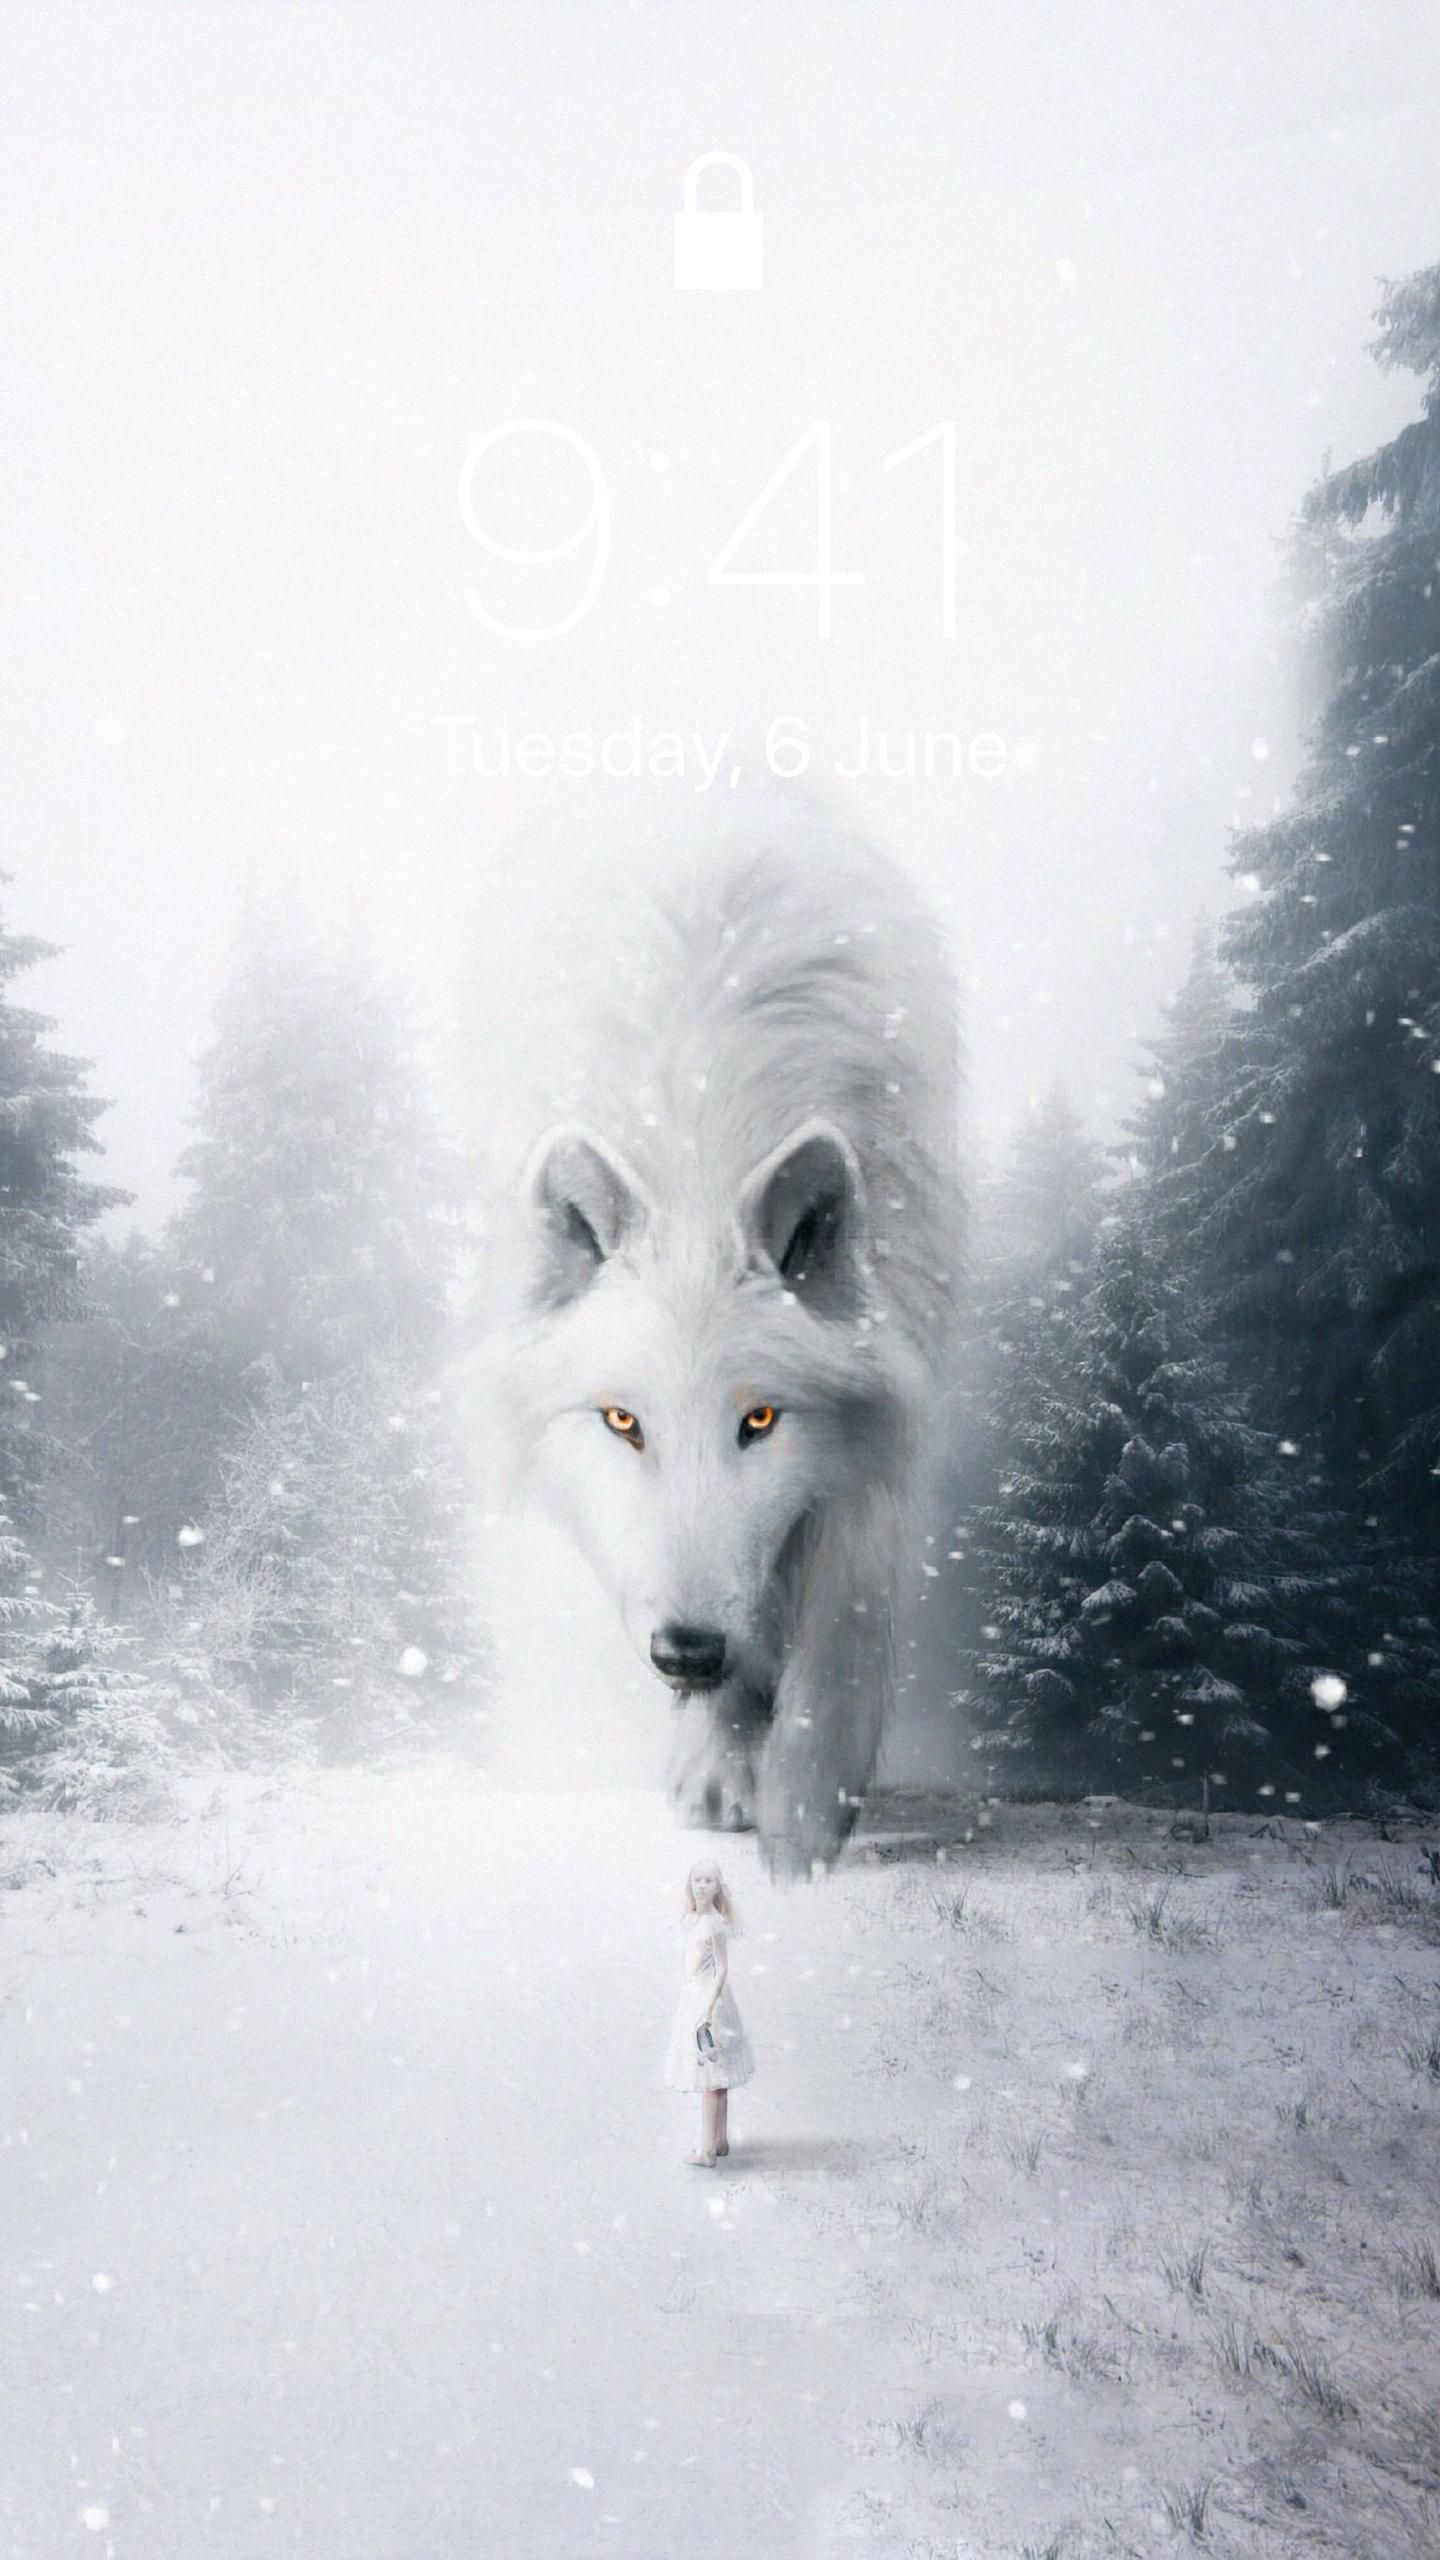 wolf snow white background wallpaper HD iPhone iPad. Wolf wallpaper, Wolf background, White background wallpaper